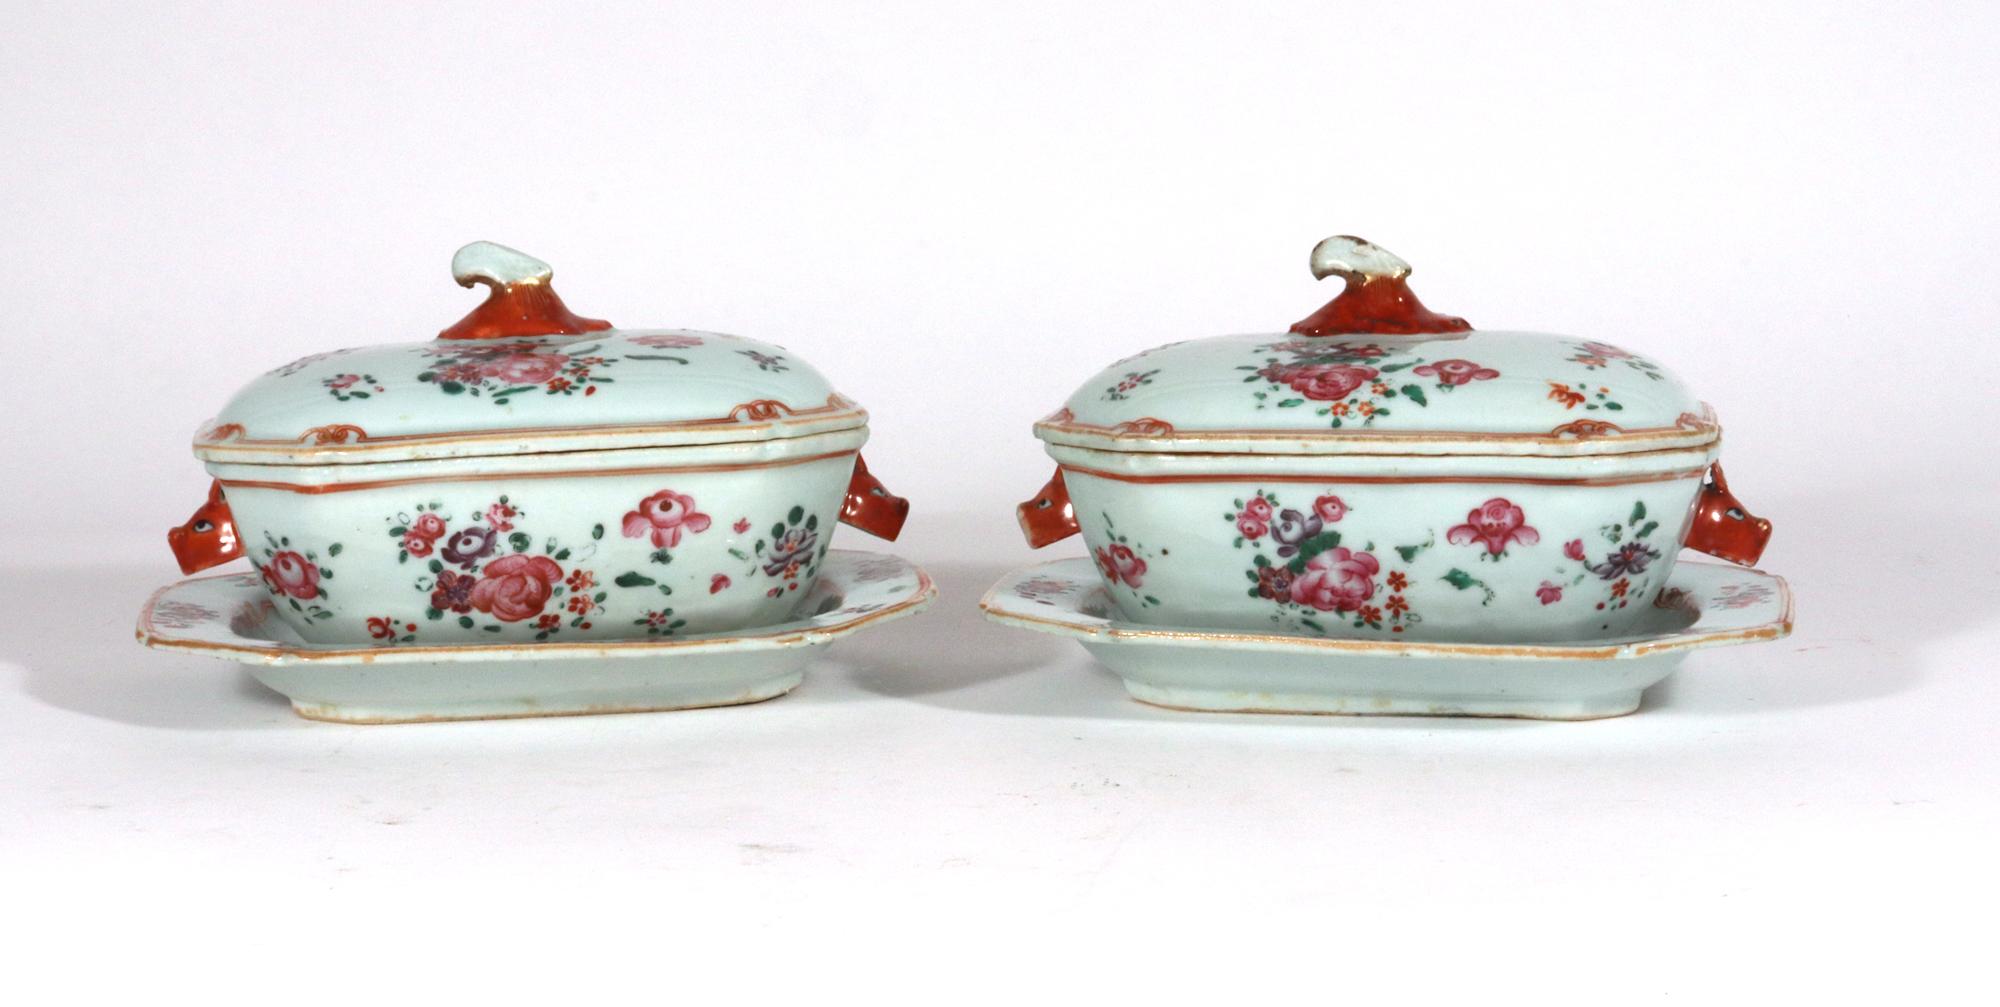 Late 18th Century Chinese Export Porcelain Famille Rose Sauce Tureens, Covers & Stands For Sale